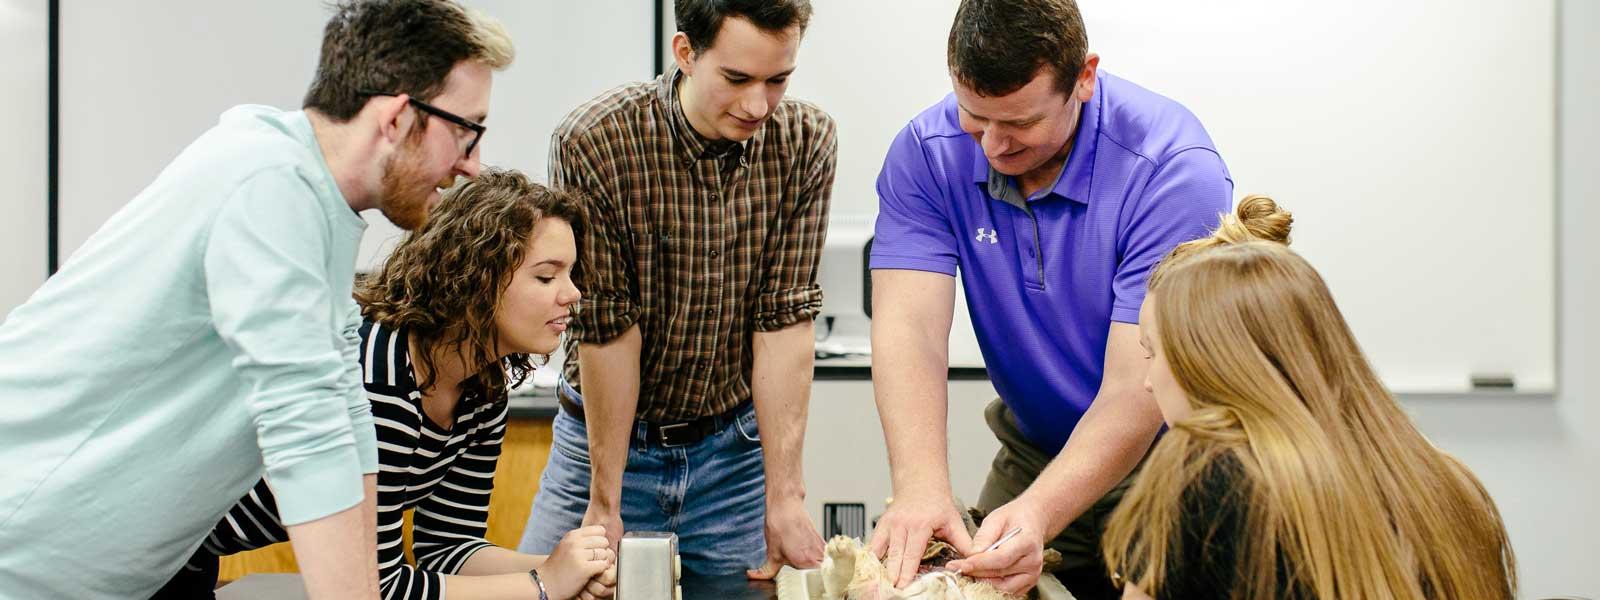 professor works on biology dissection with four students observing